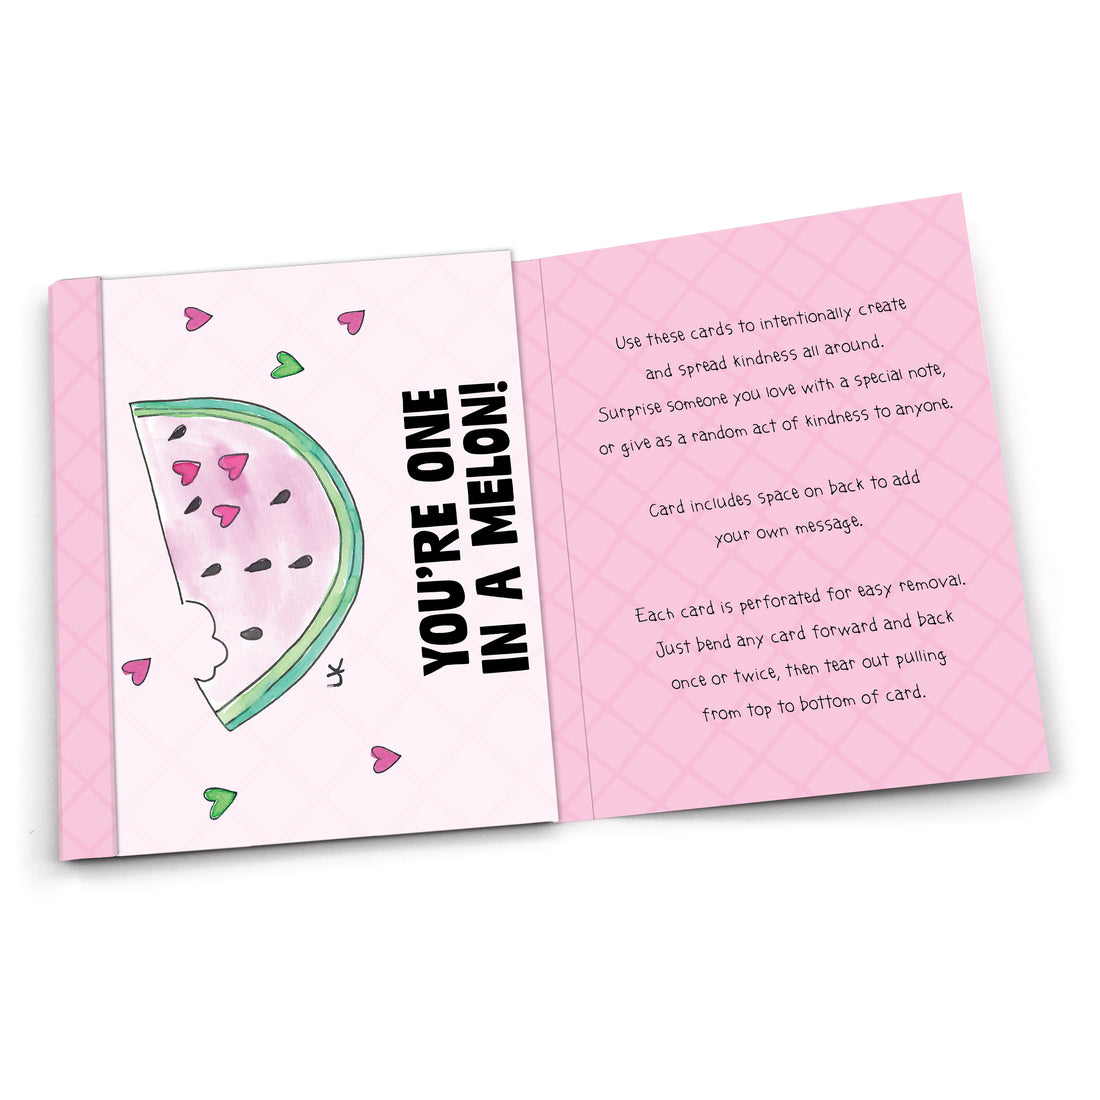 Jumbo Lunch Notes: Kindness on Purpose - Pack of 6